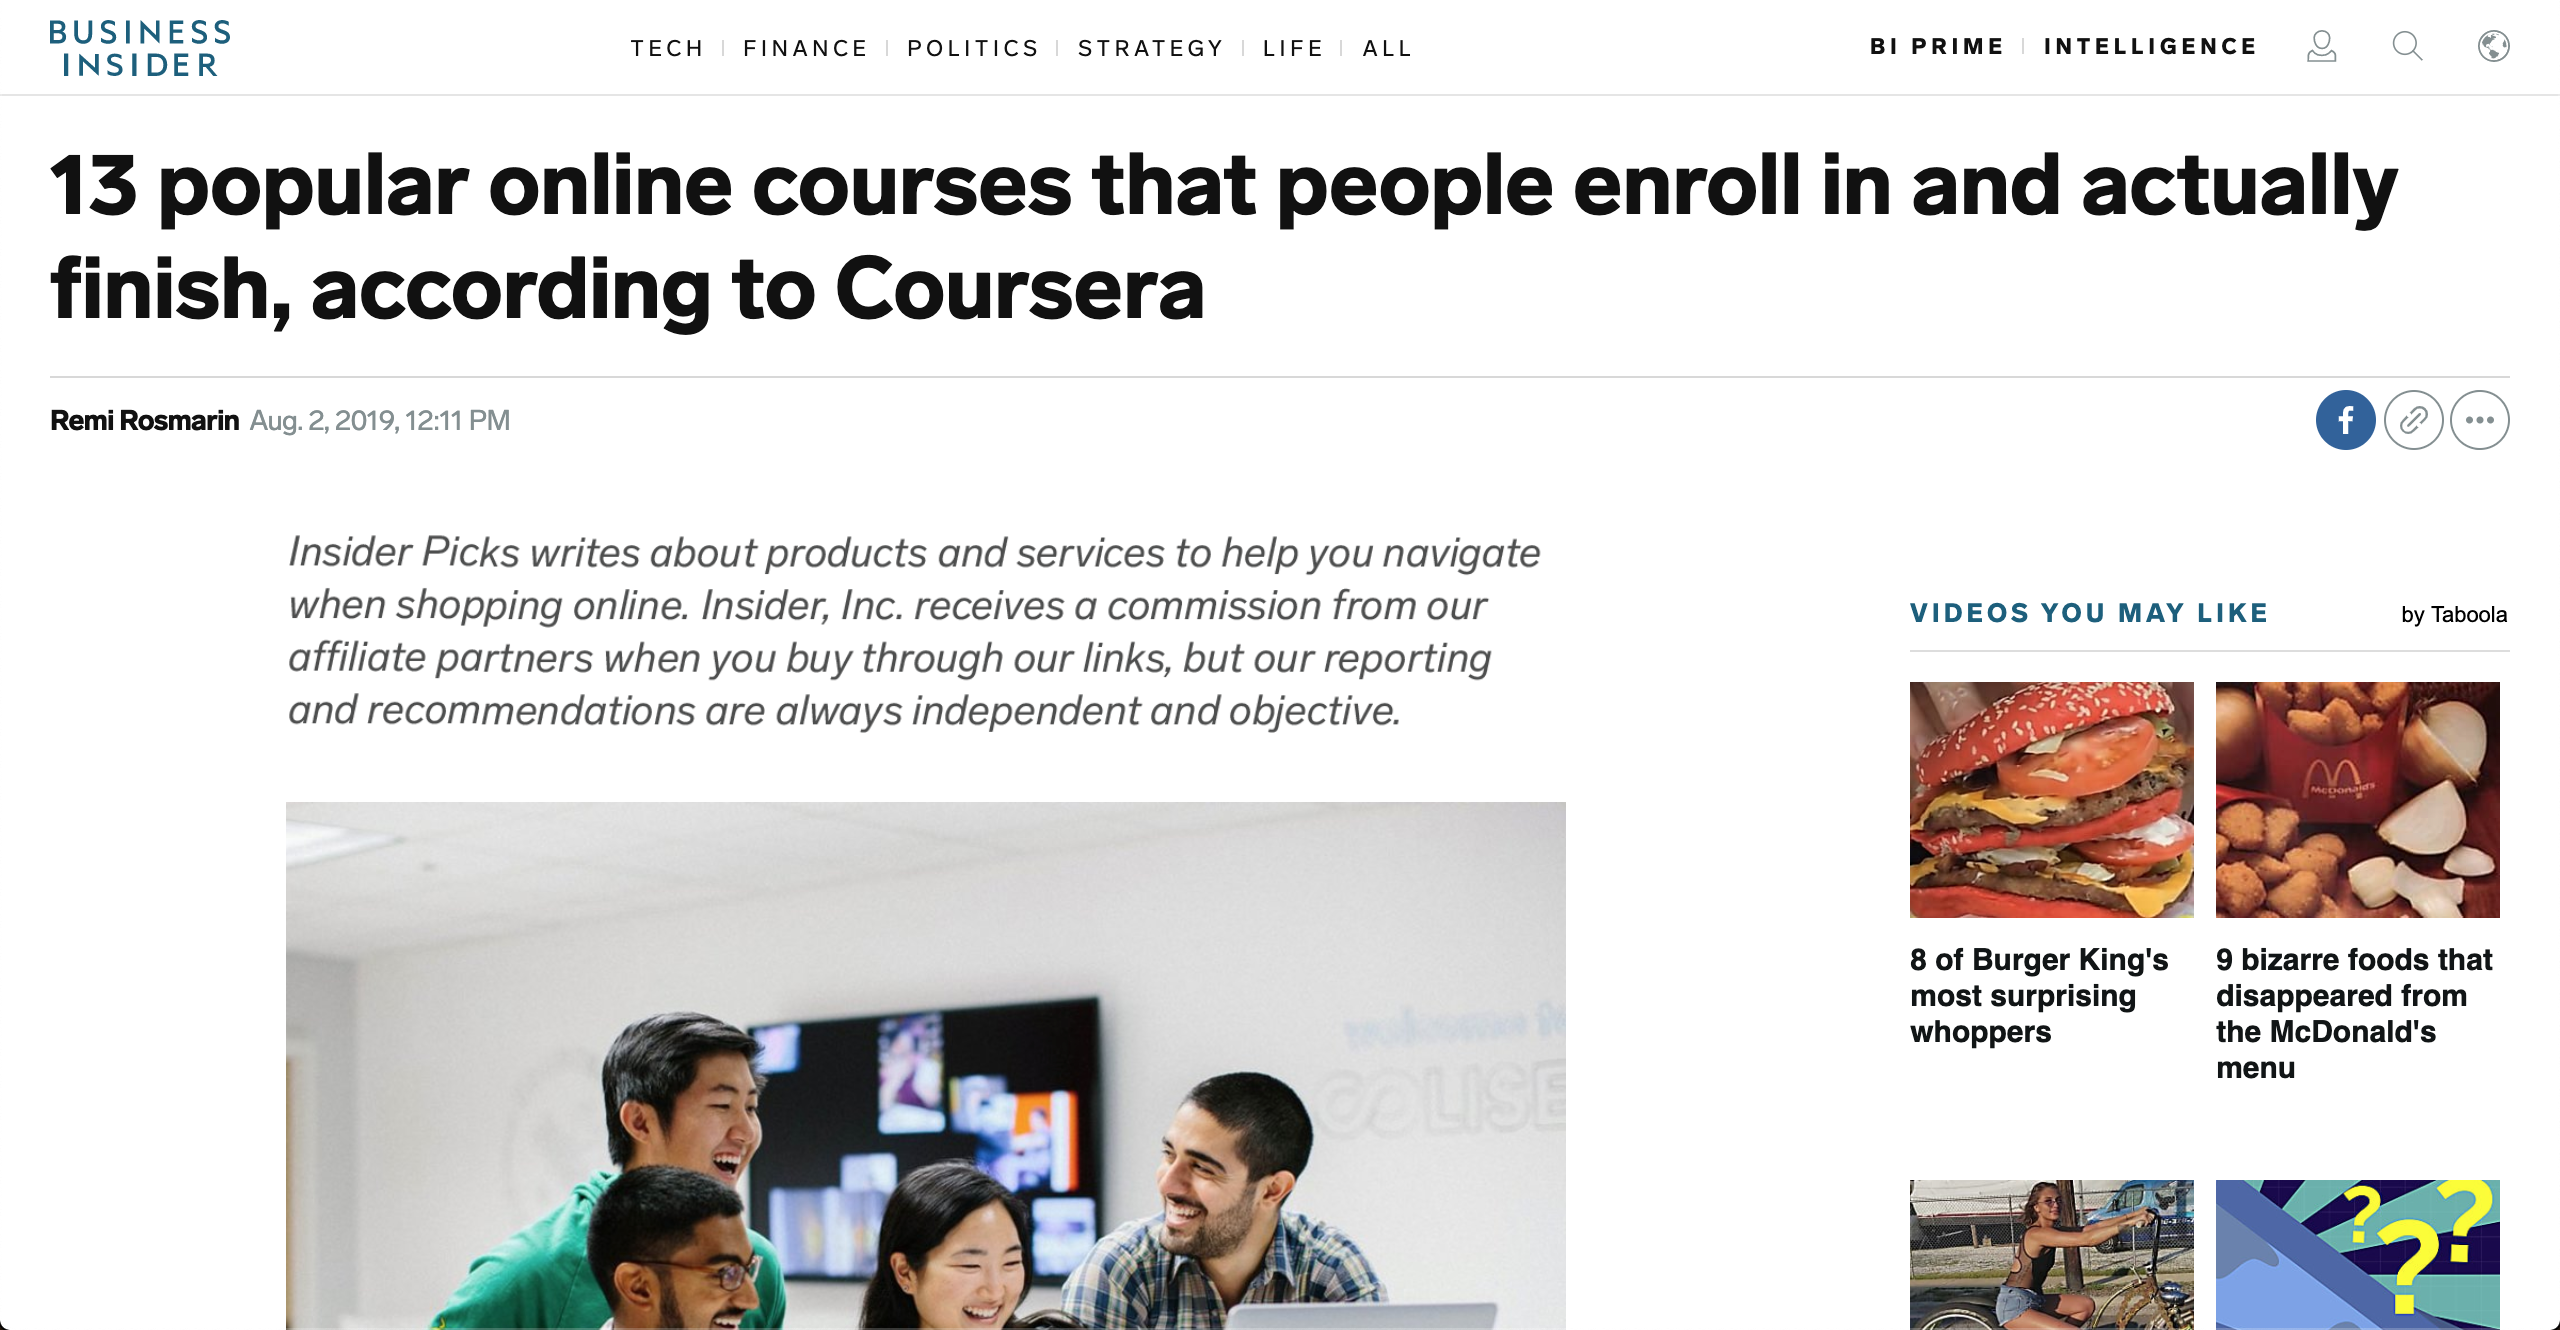 13 Popular Online Courses That People Enroll in and Actually Finish, According to Coursera